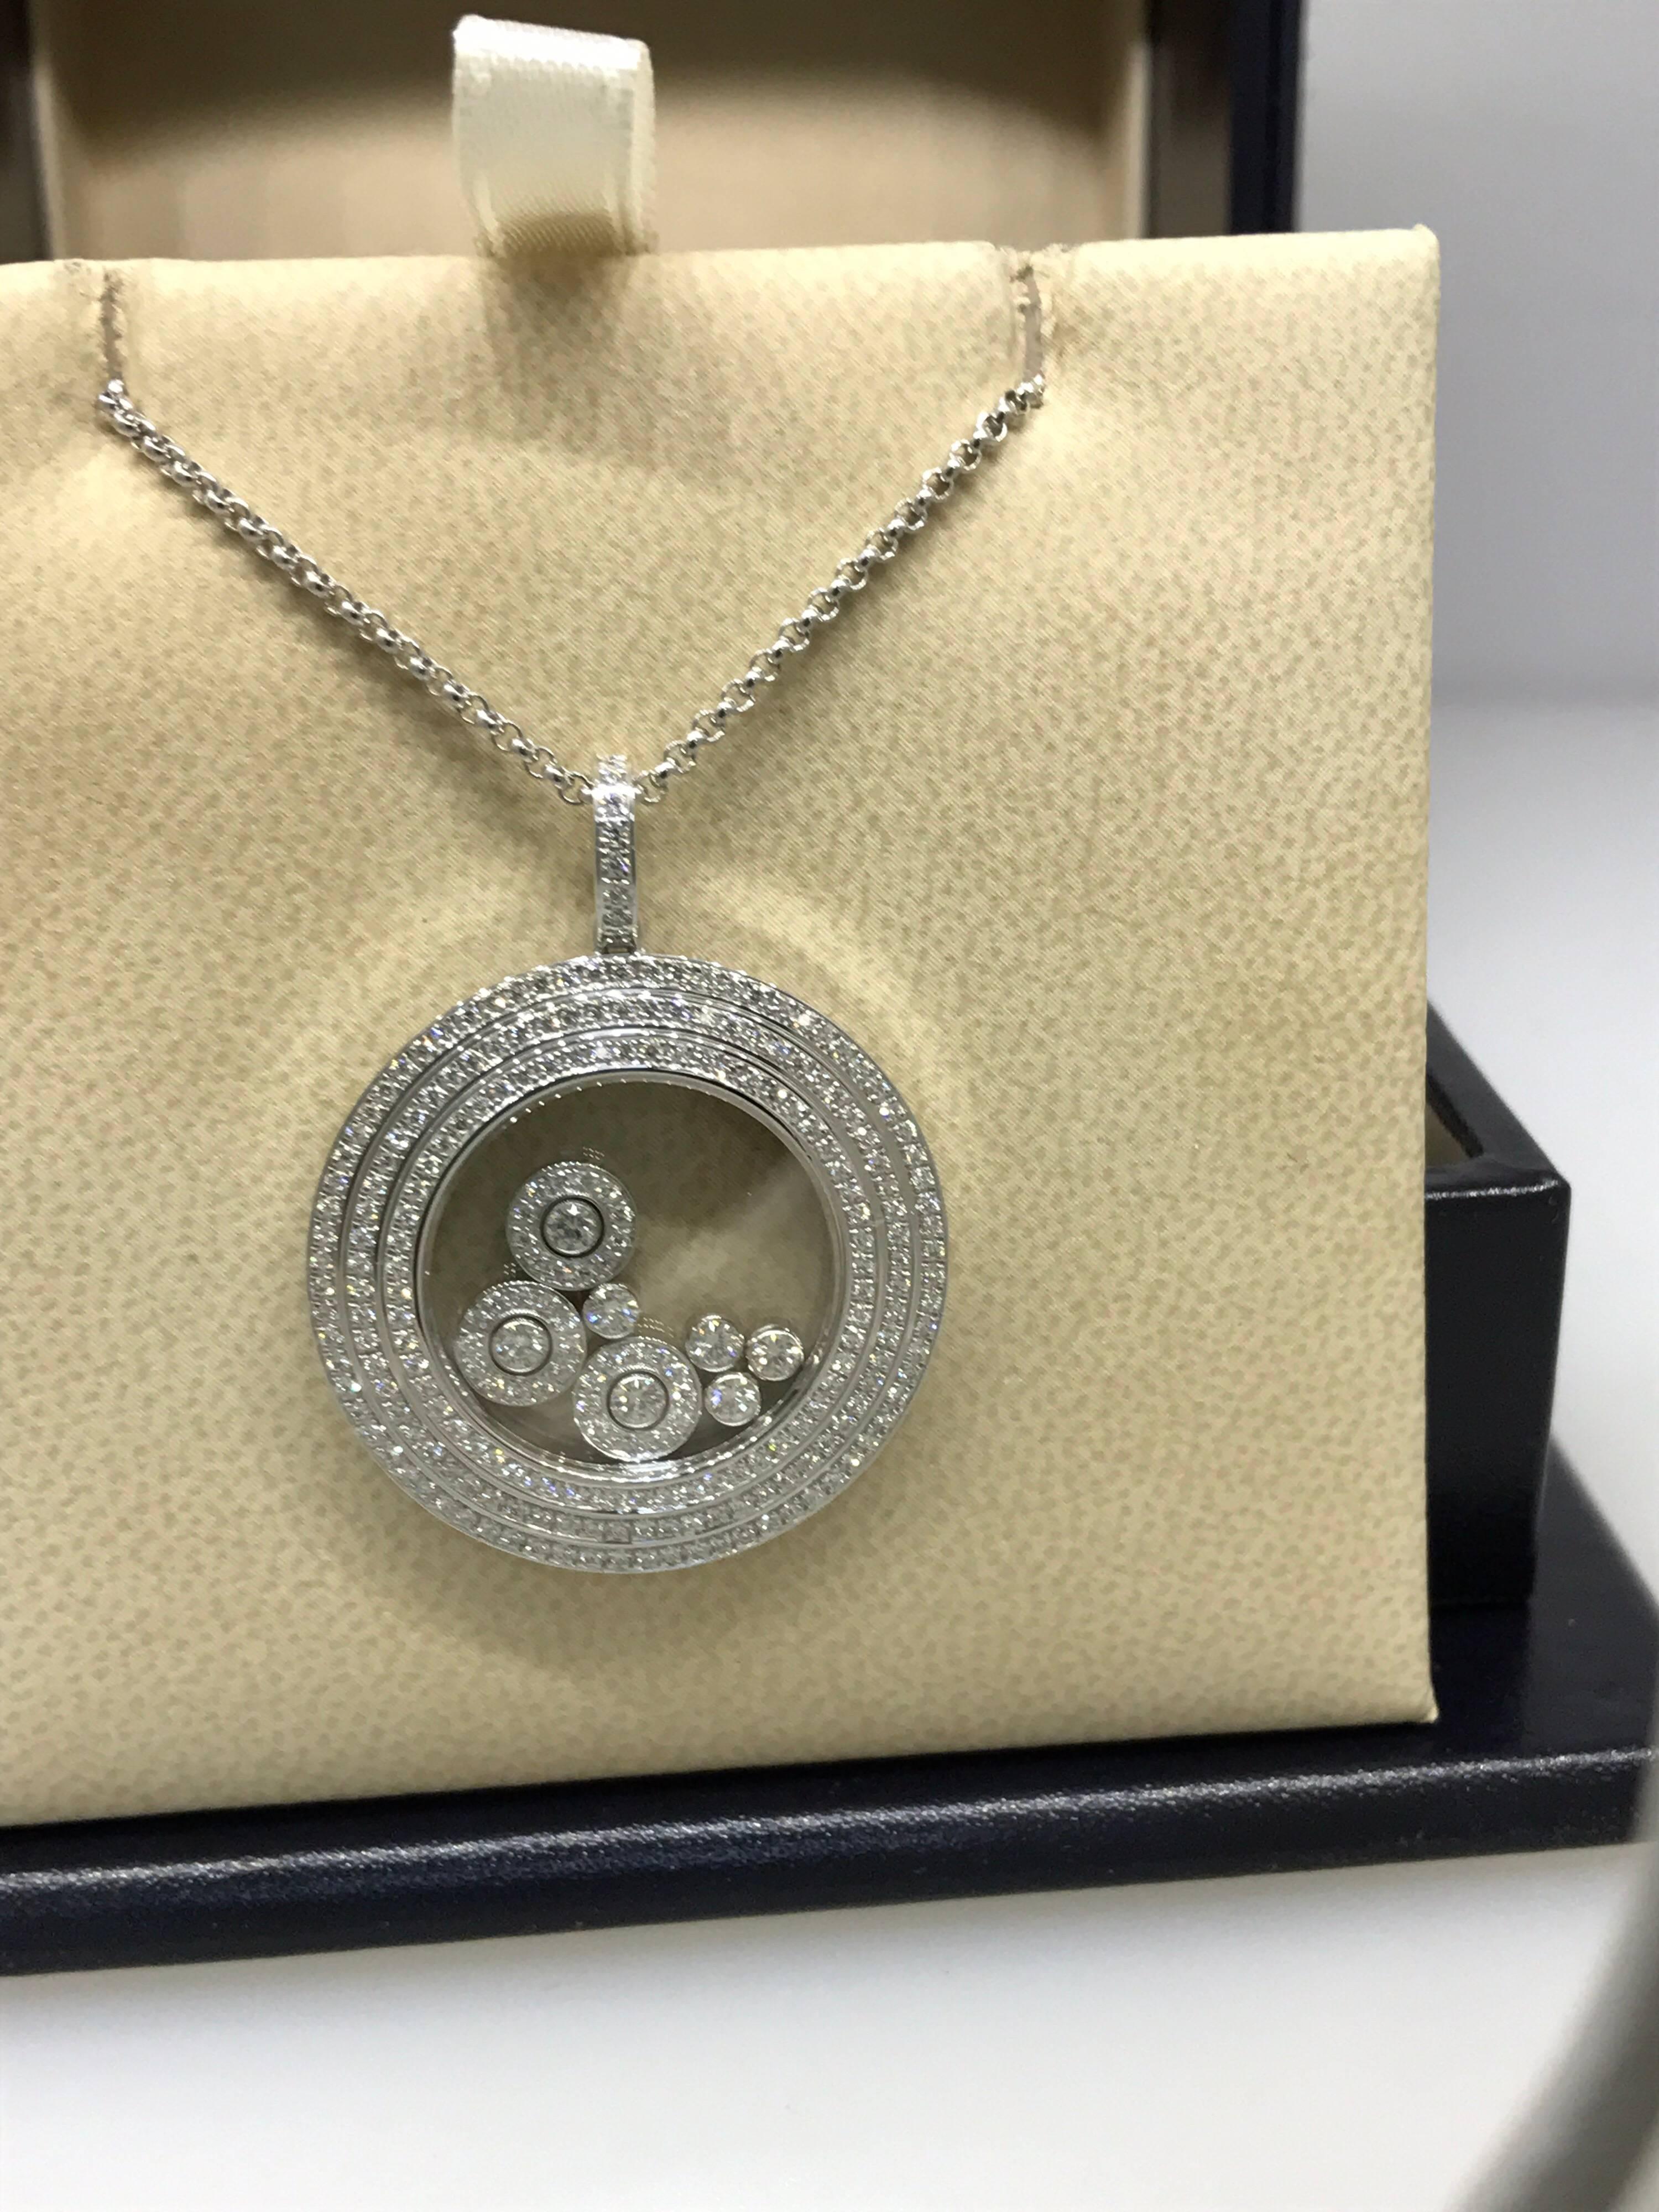 Chopard Happy Diamonds Pendant / Necklace

Model Number: 79/6950-1001

100% Authentic

Brand New

Comes with original Chopard box, certificate of authenticity and warranty and jewels manual

18 Karat White Gold (24.80gr)

236 Diamonds on the pendant